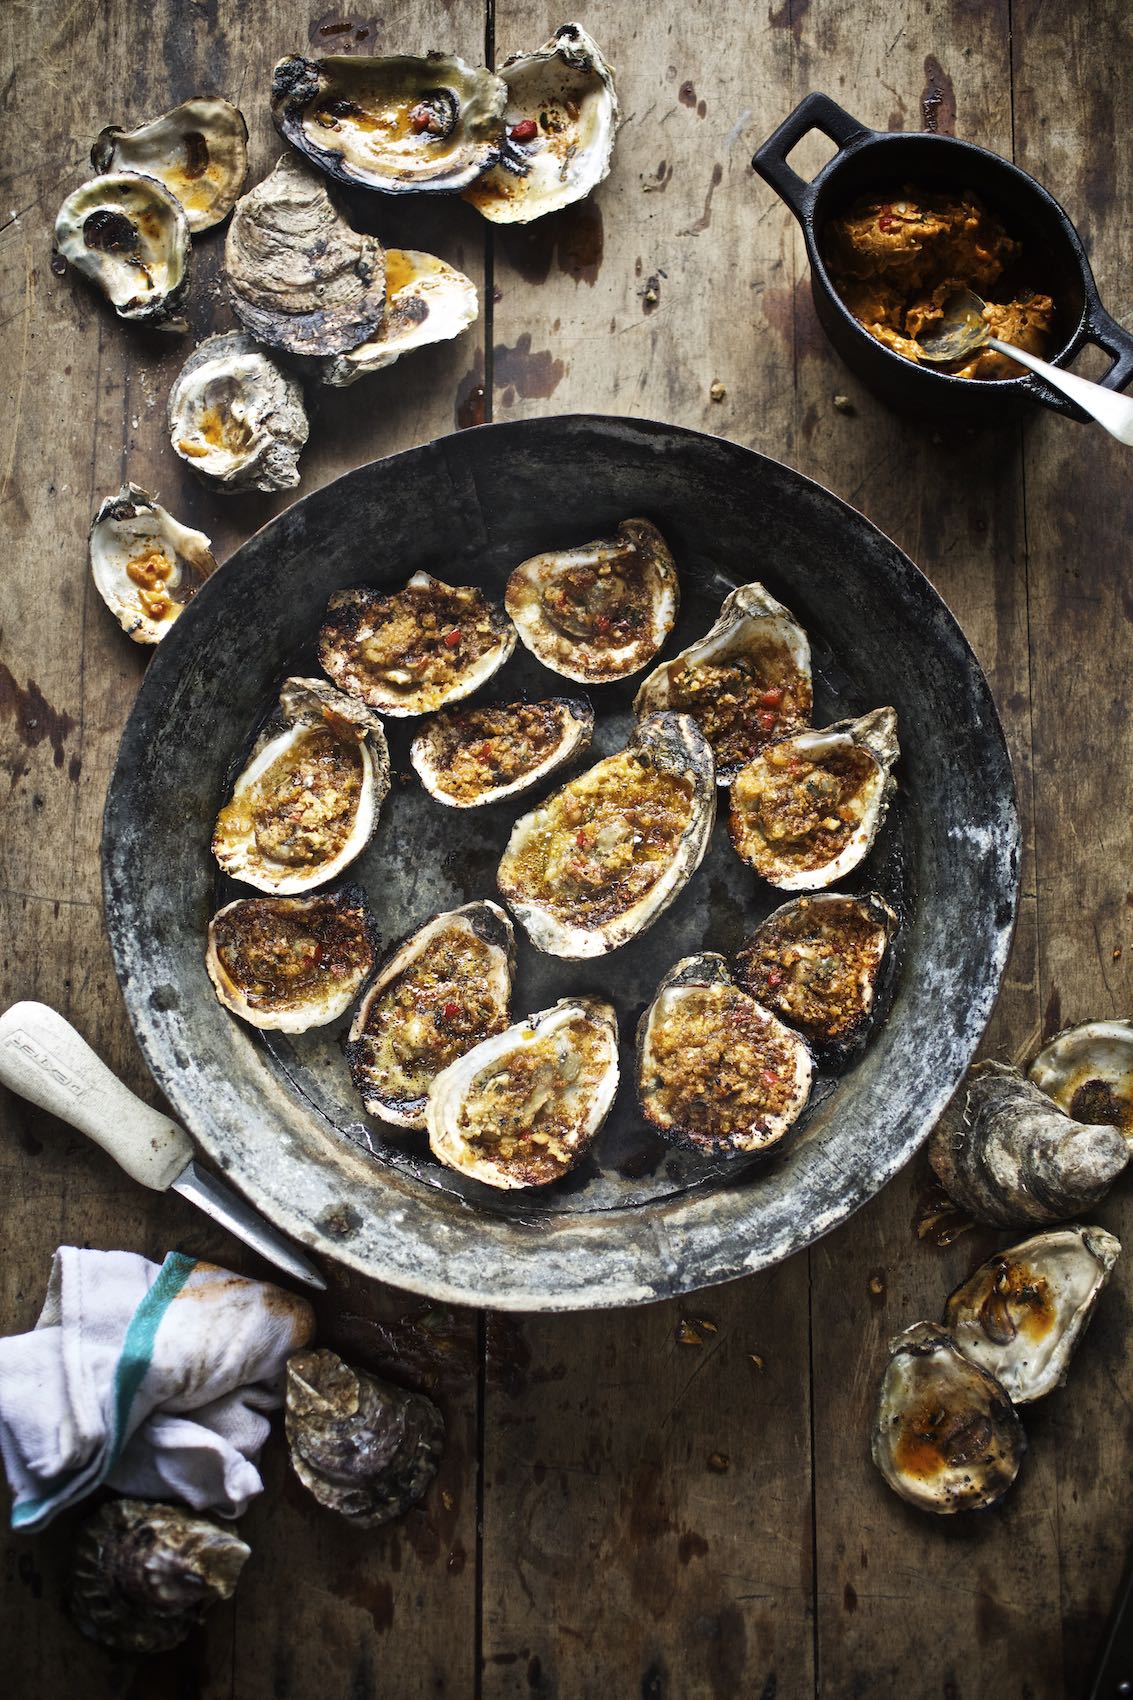 Jody Horton Photography - Grilled oysters served in a metal bowl on a rustic, wood table. 